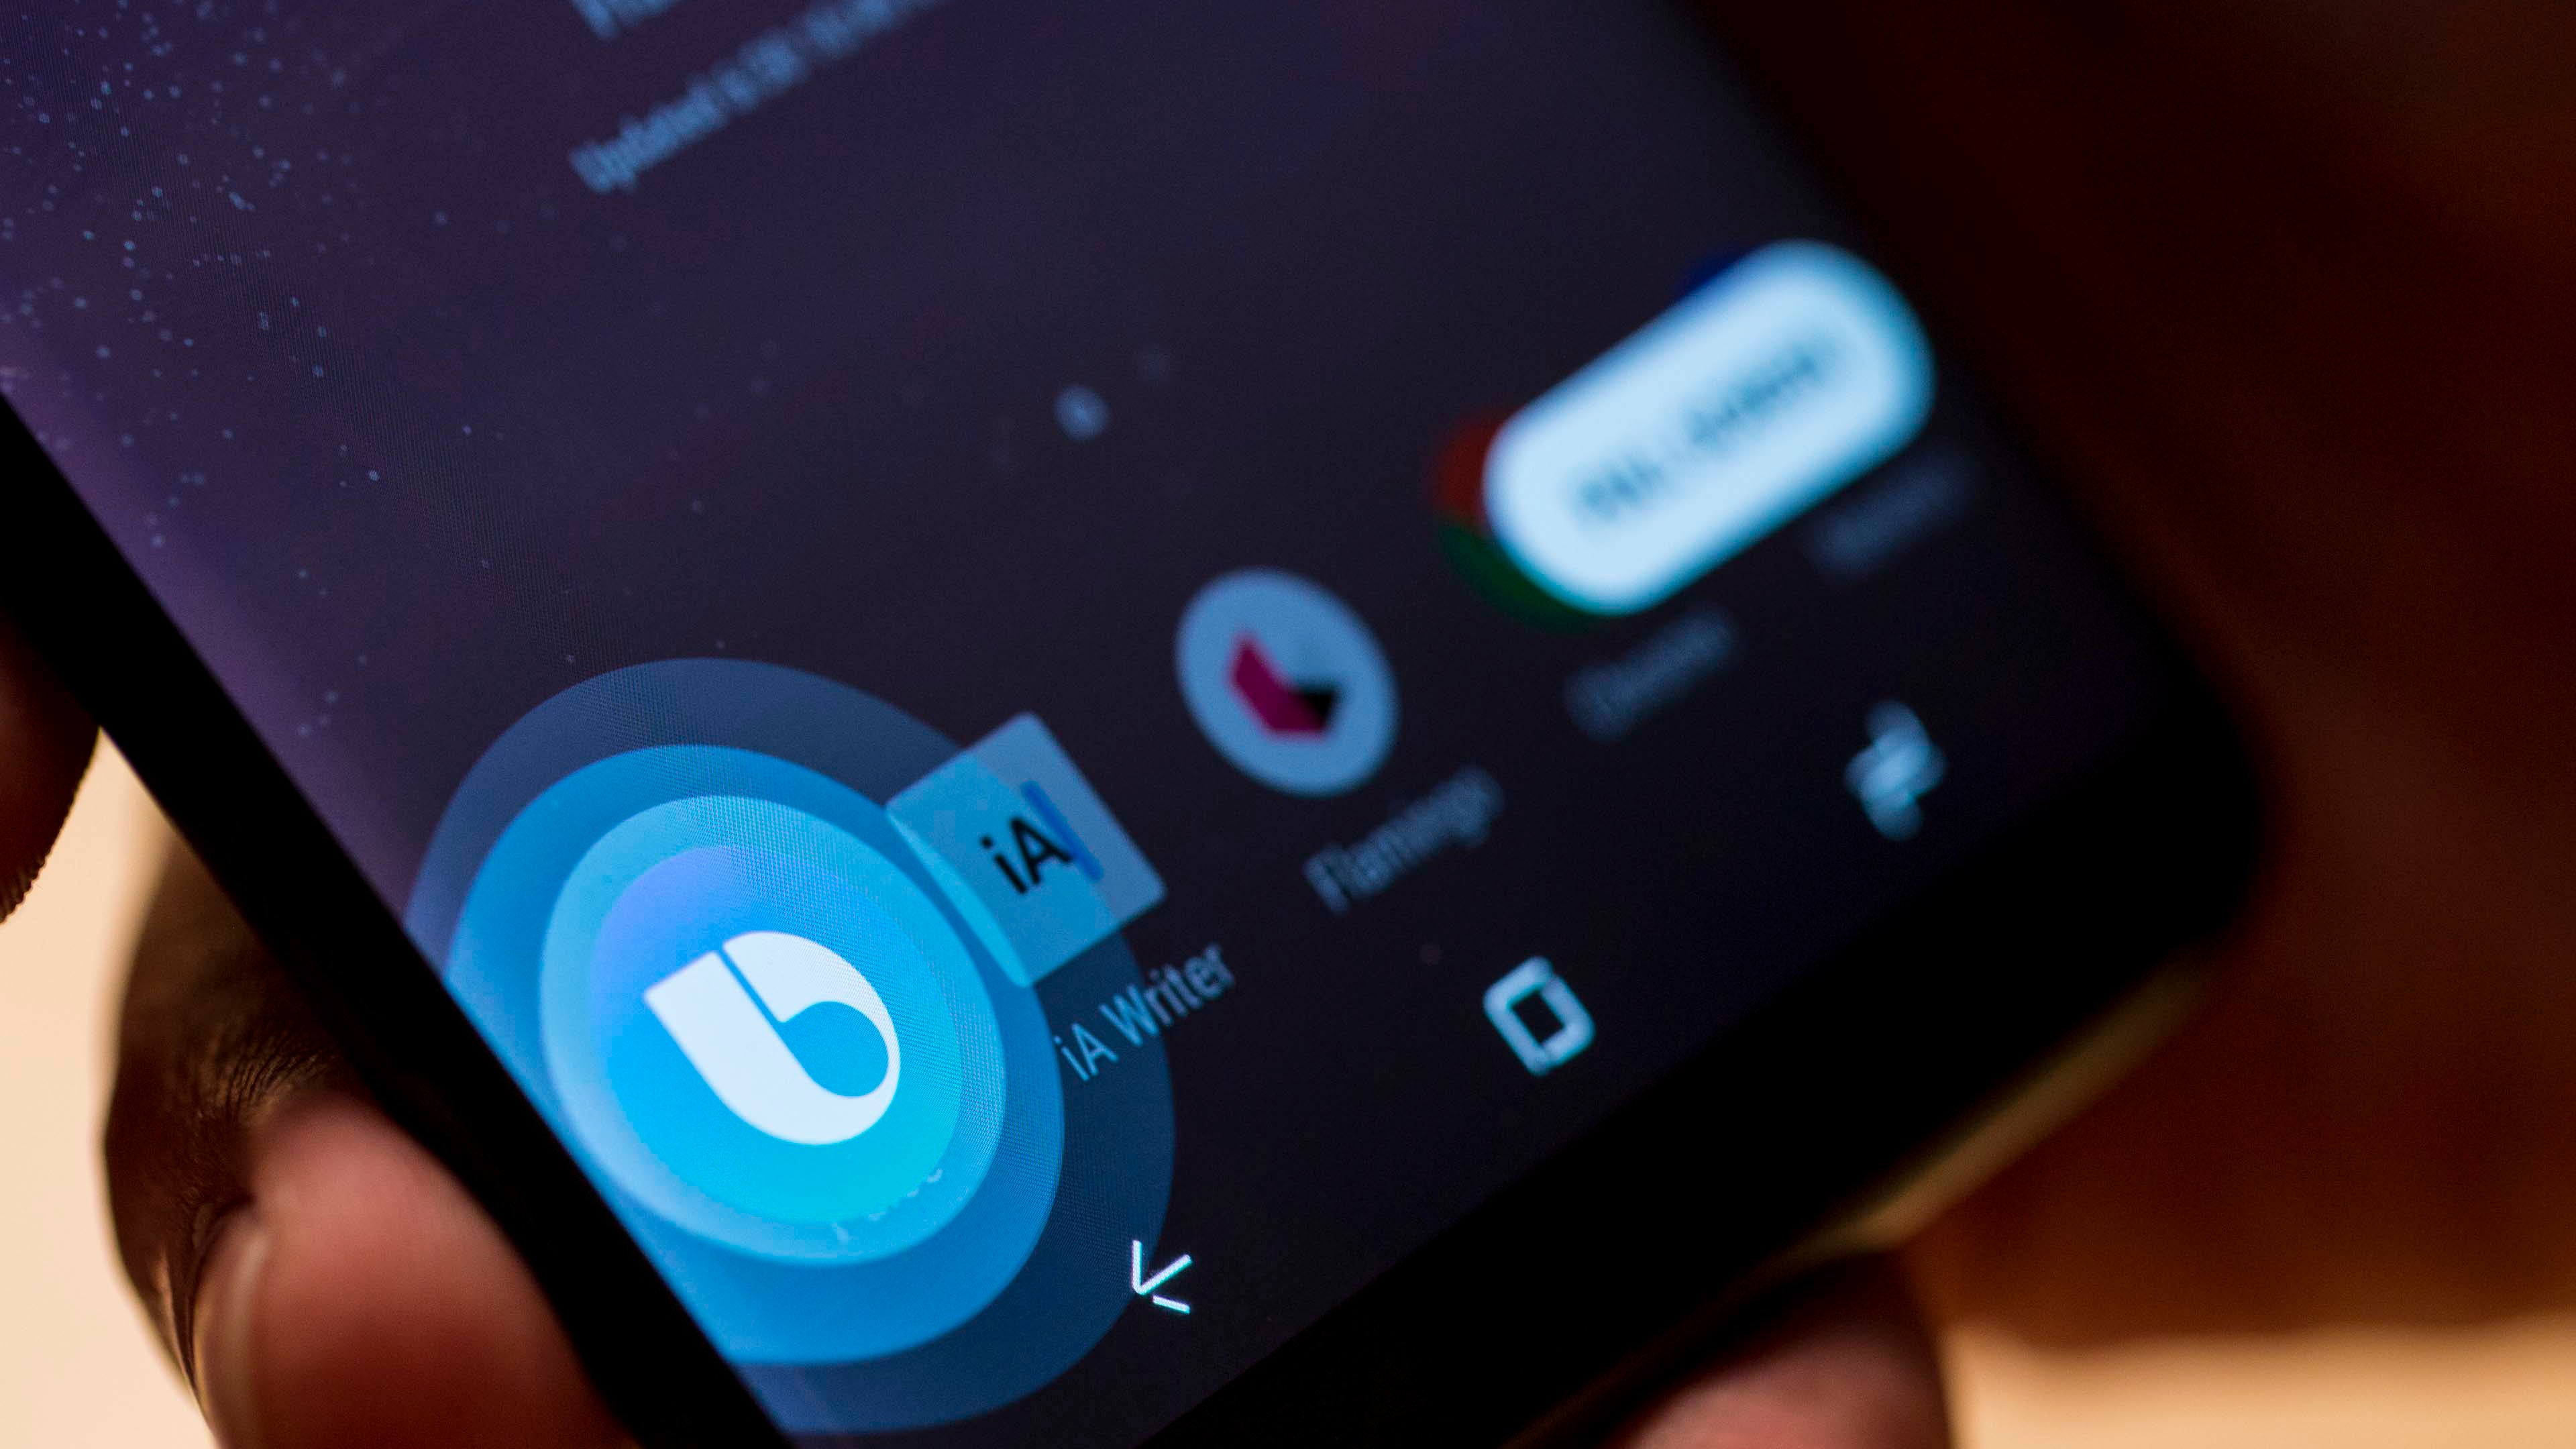 Samsung Bixby: Hands on with the AI assistant